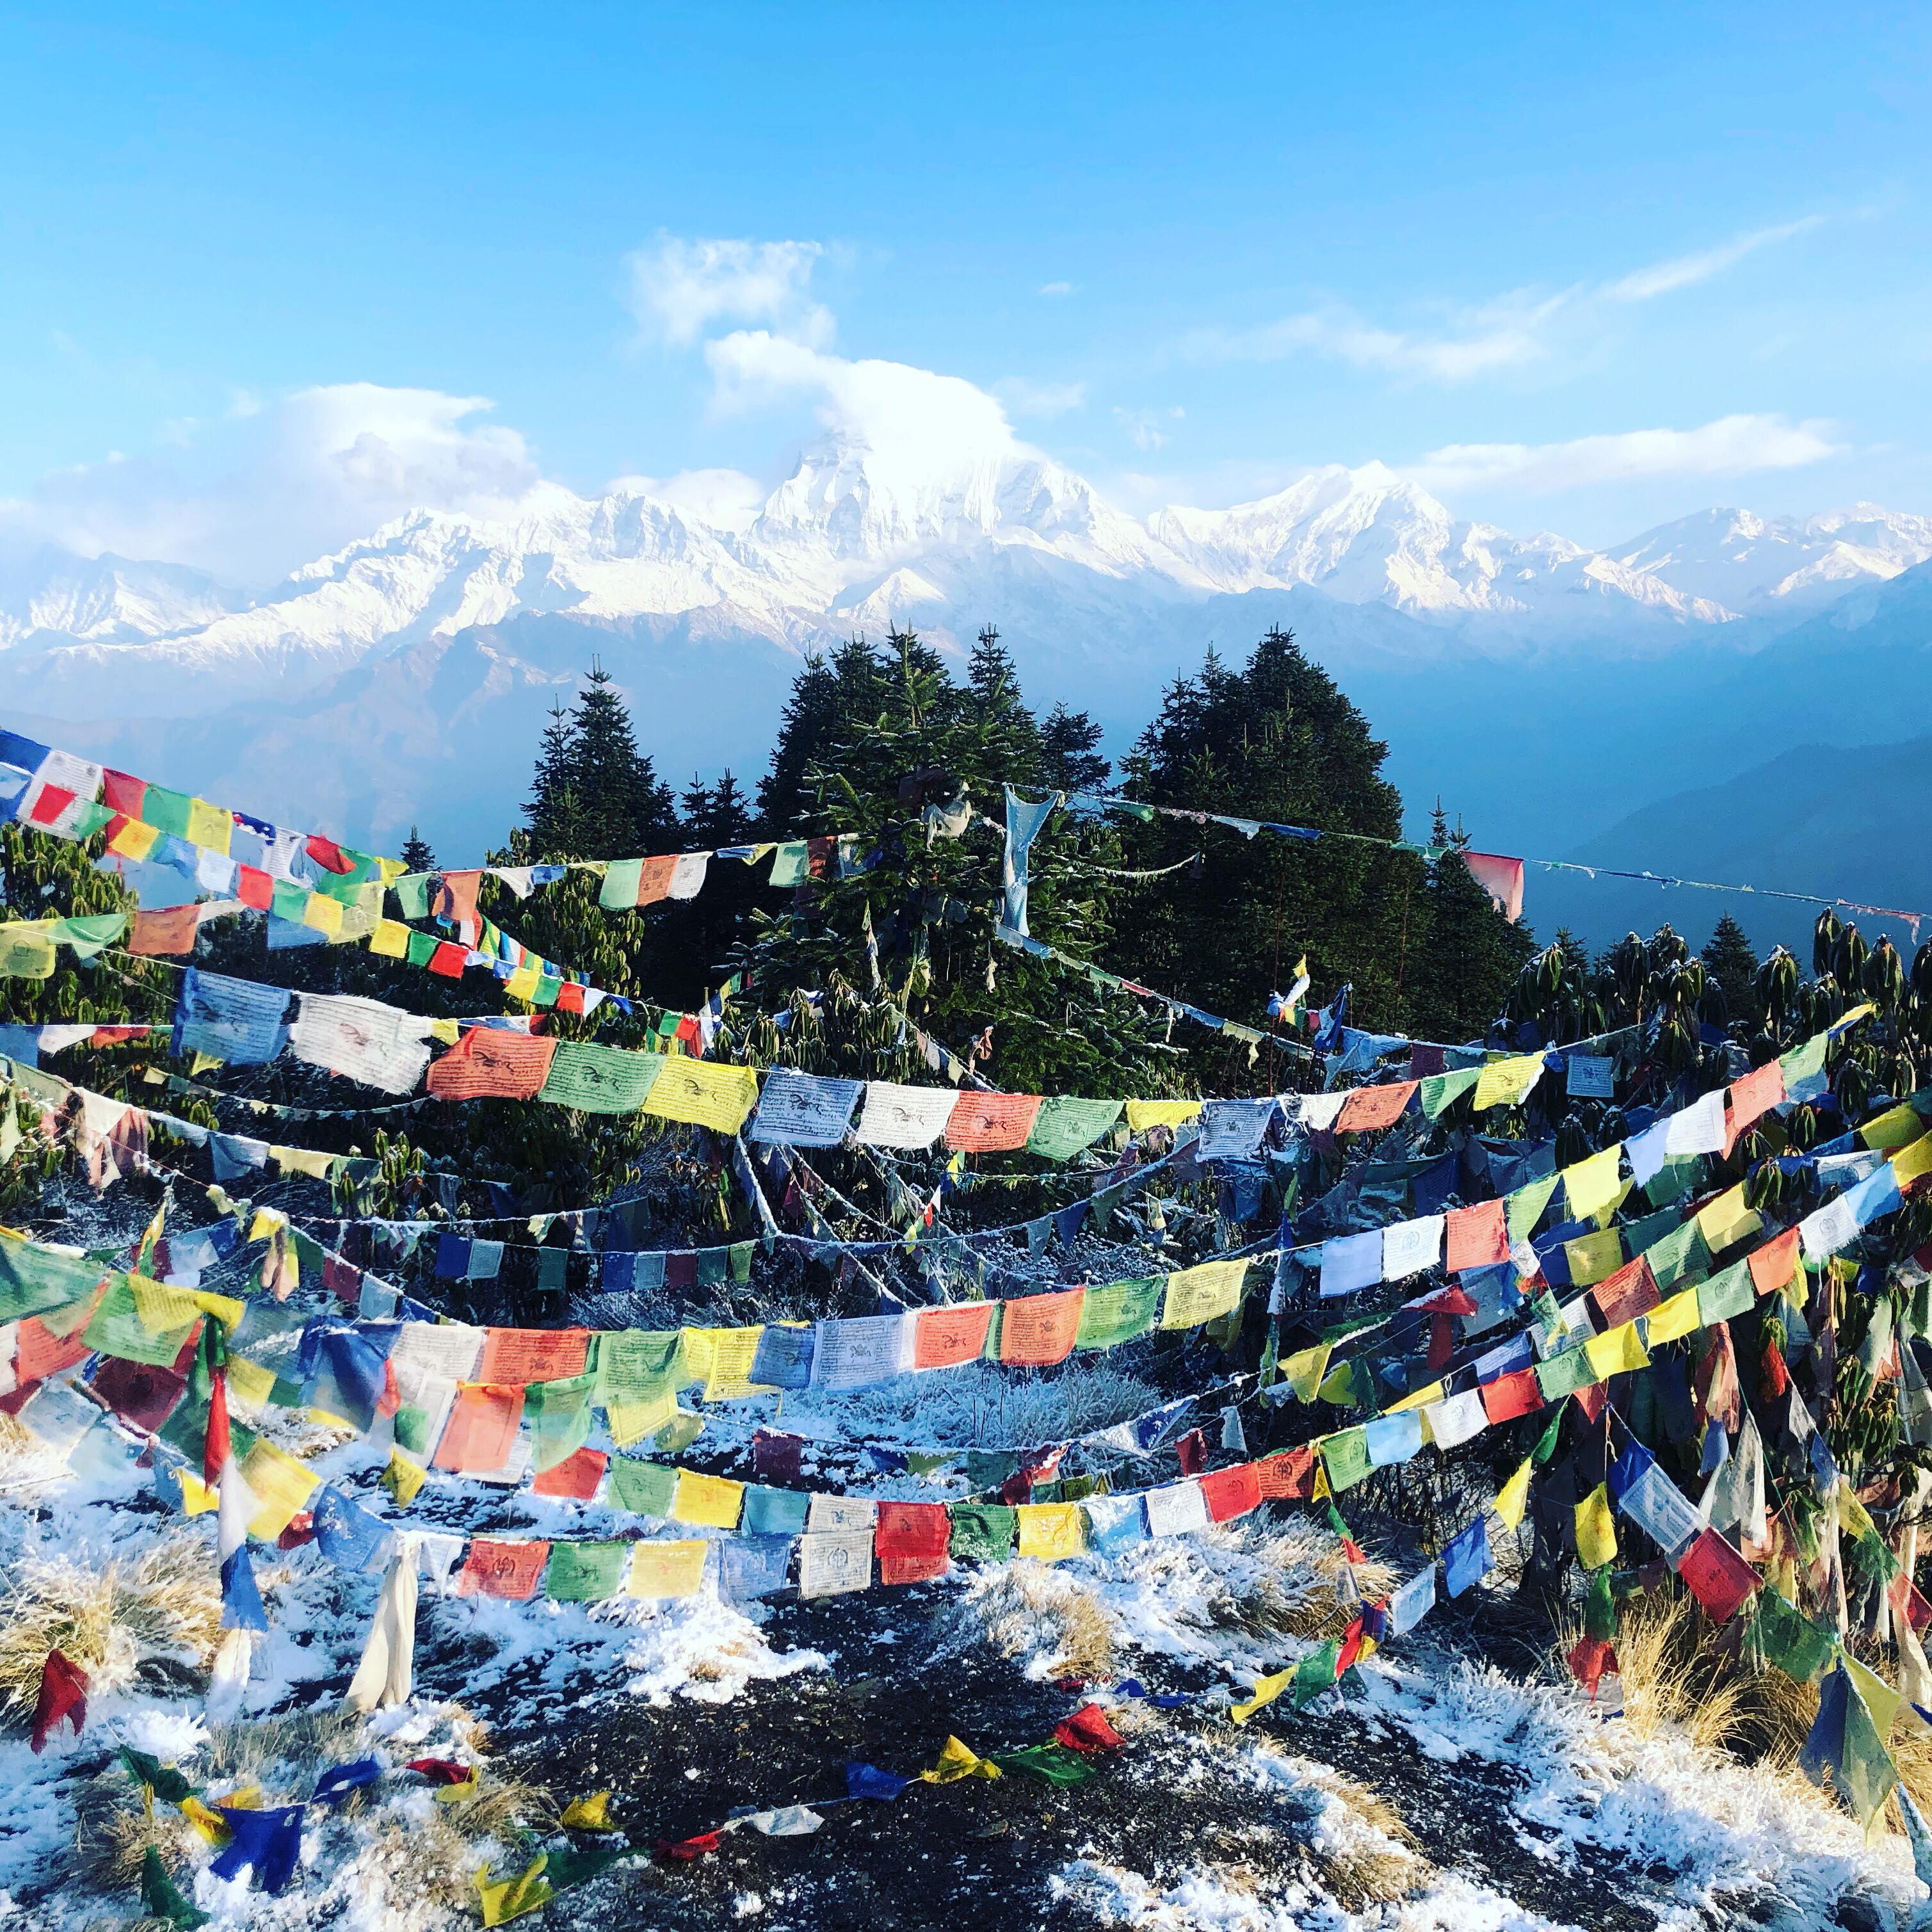 Why to travel to Annapurna region for trekking?